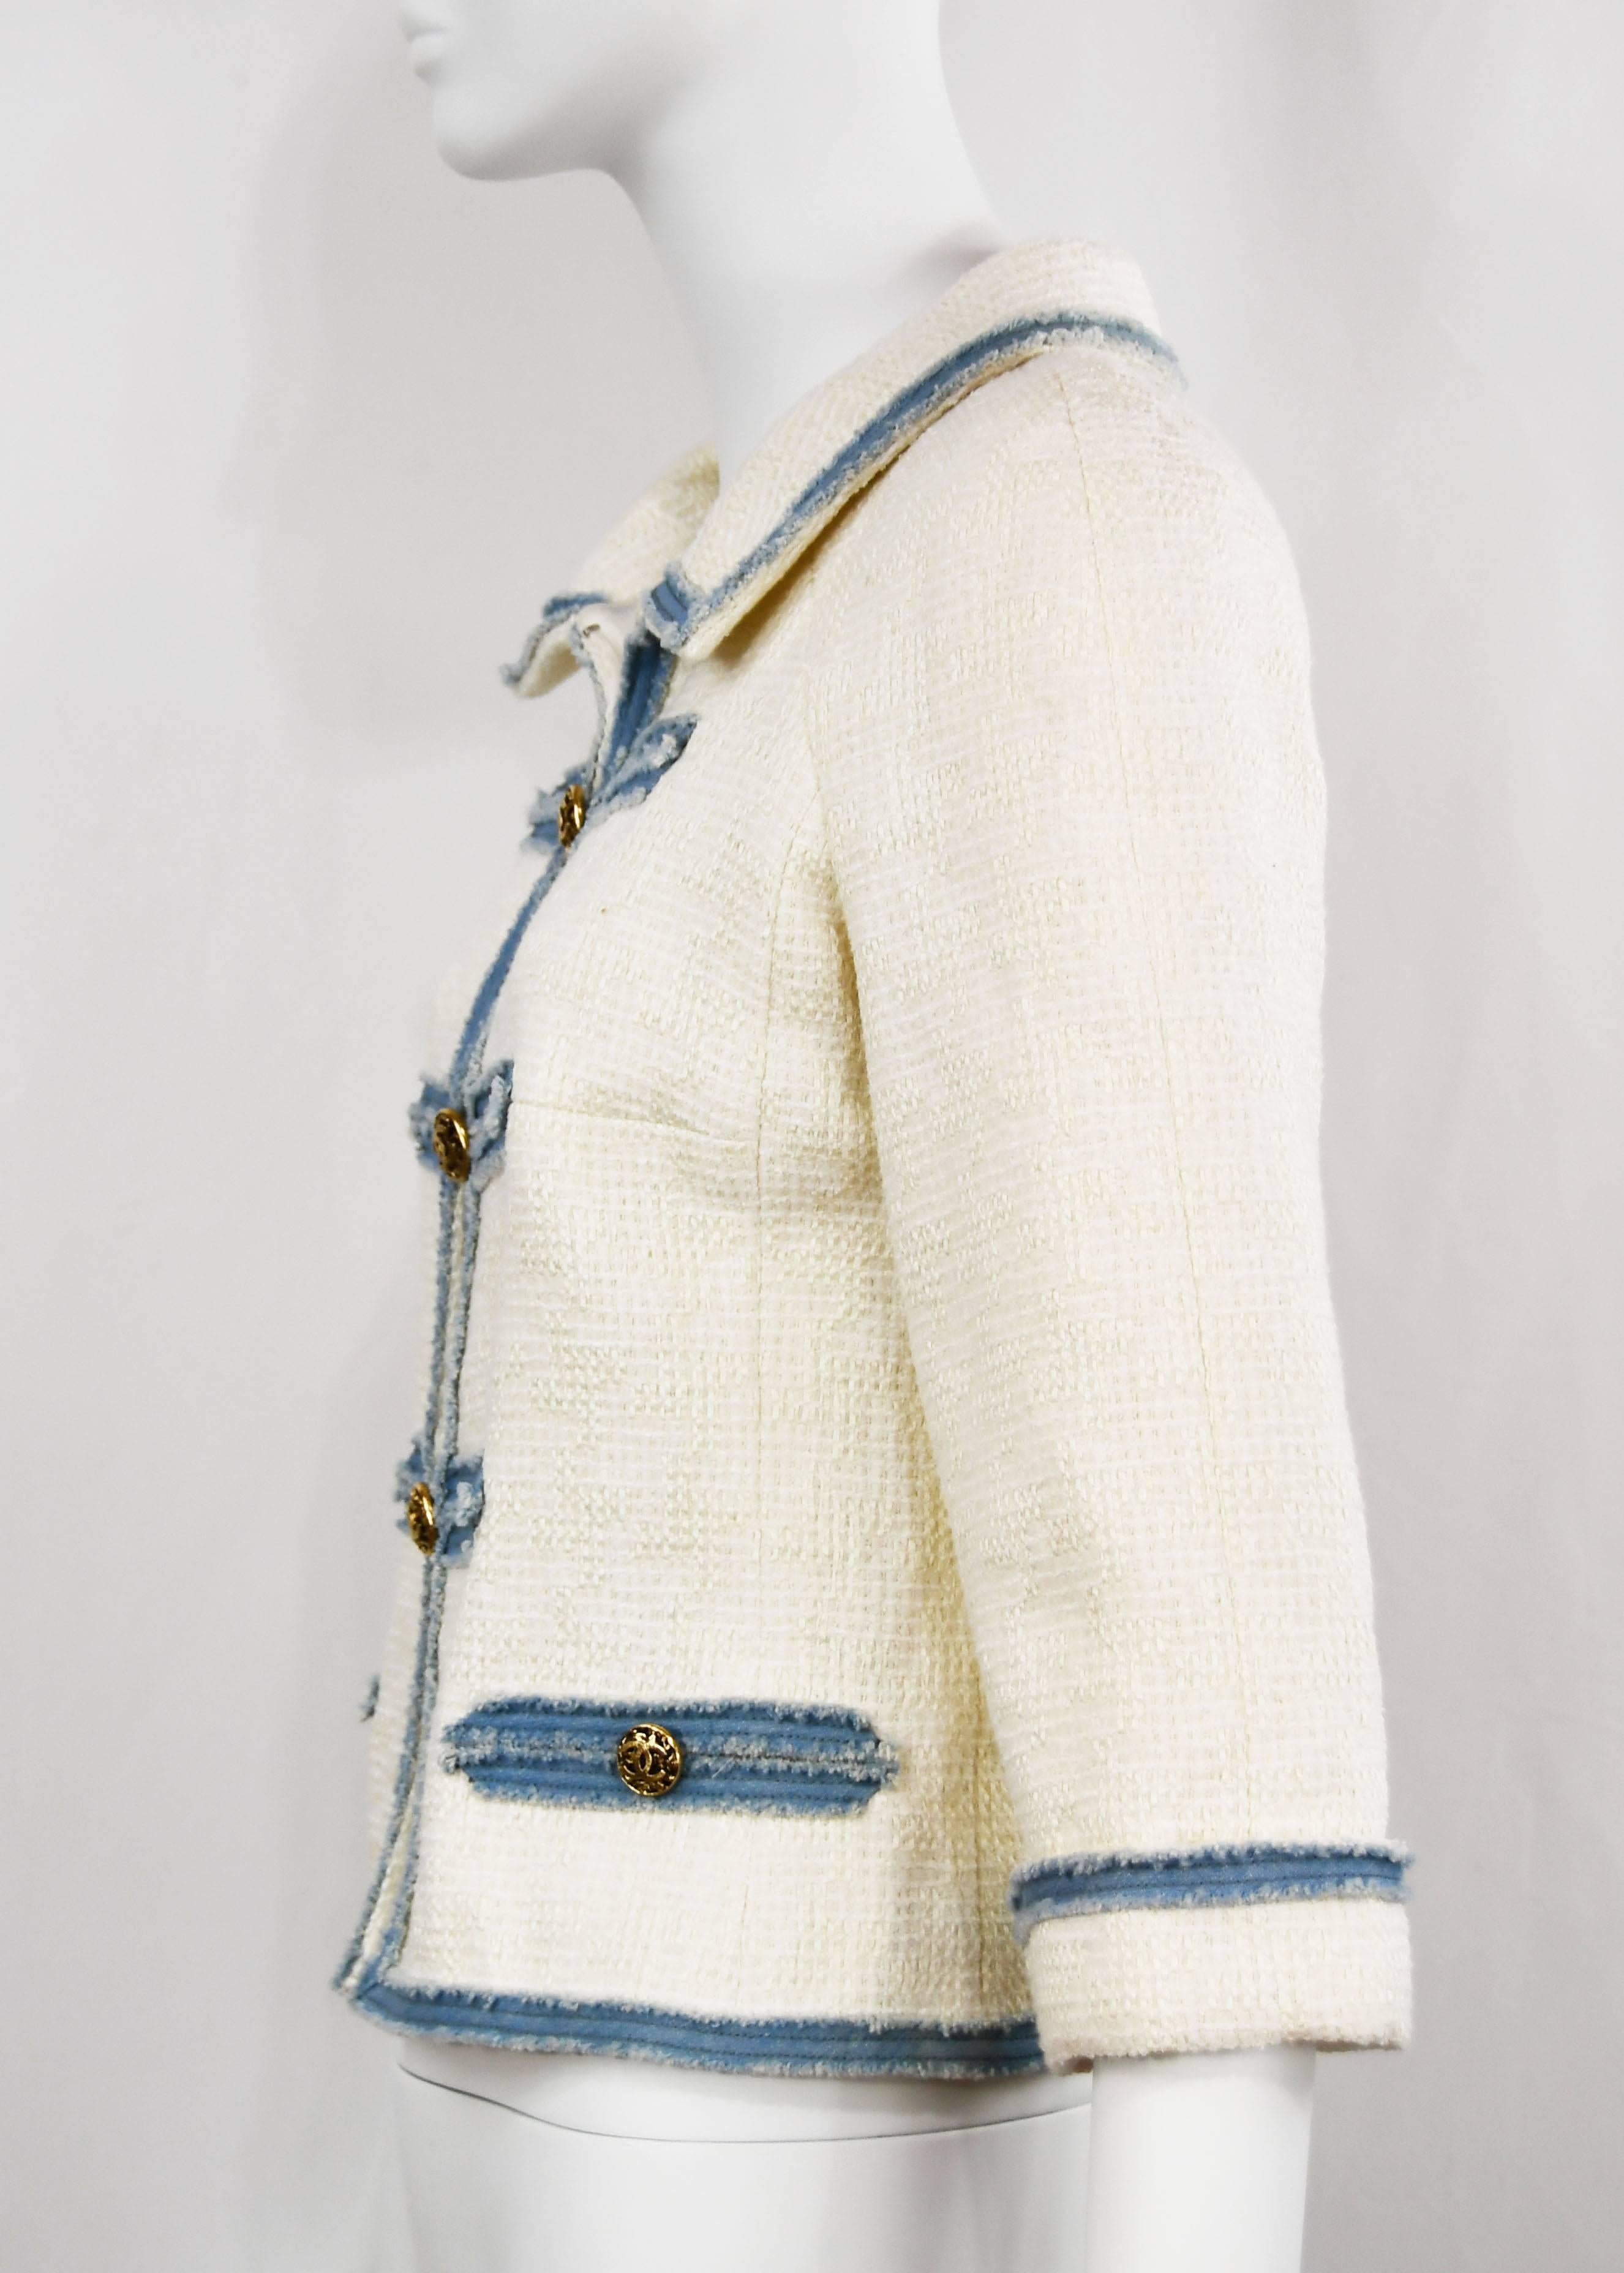 Chanel runway, very rare, elegant white Cotton Boucle Jacket with light denim trimmed frayed detail, FR 36, US 4.  Classic chunky gilt 'CC' buttons down the front.  There are two pockets.  It is lined in silk and the hem is chain weighed.  This item